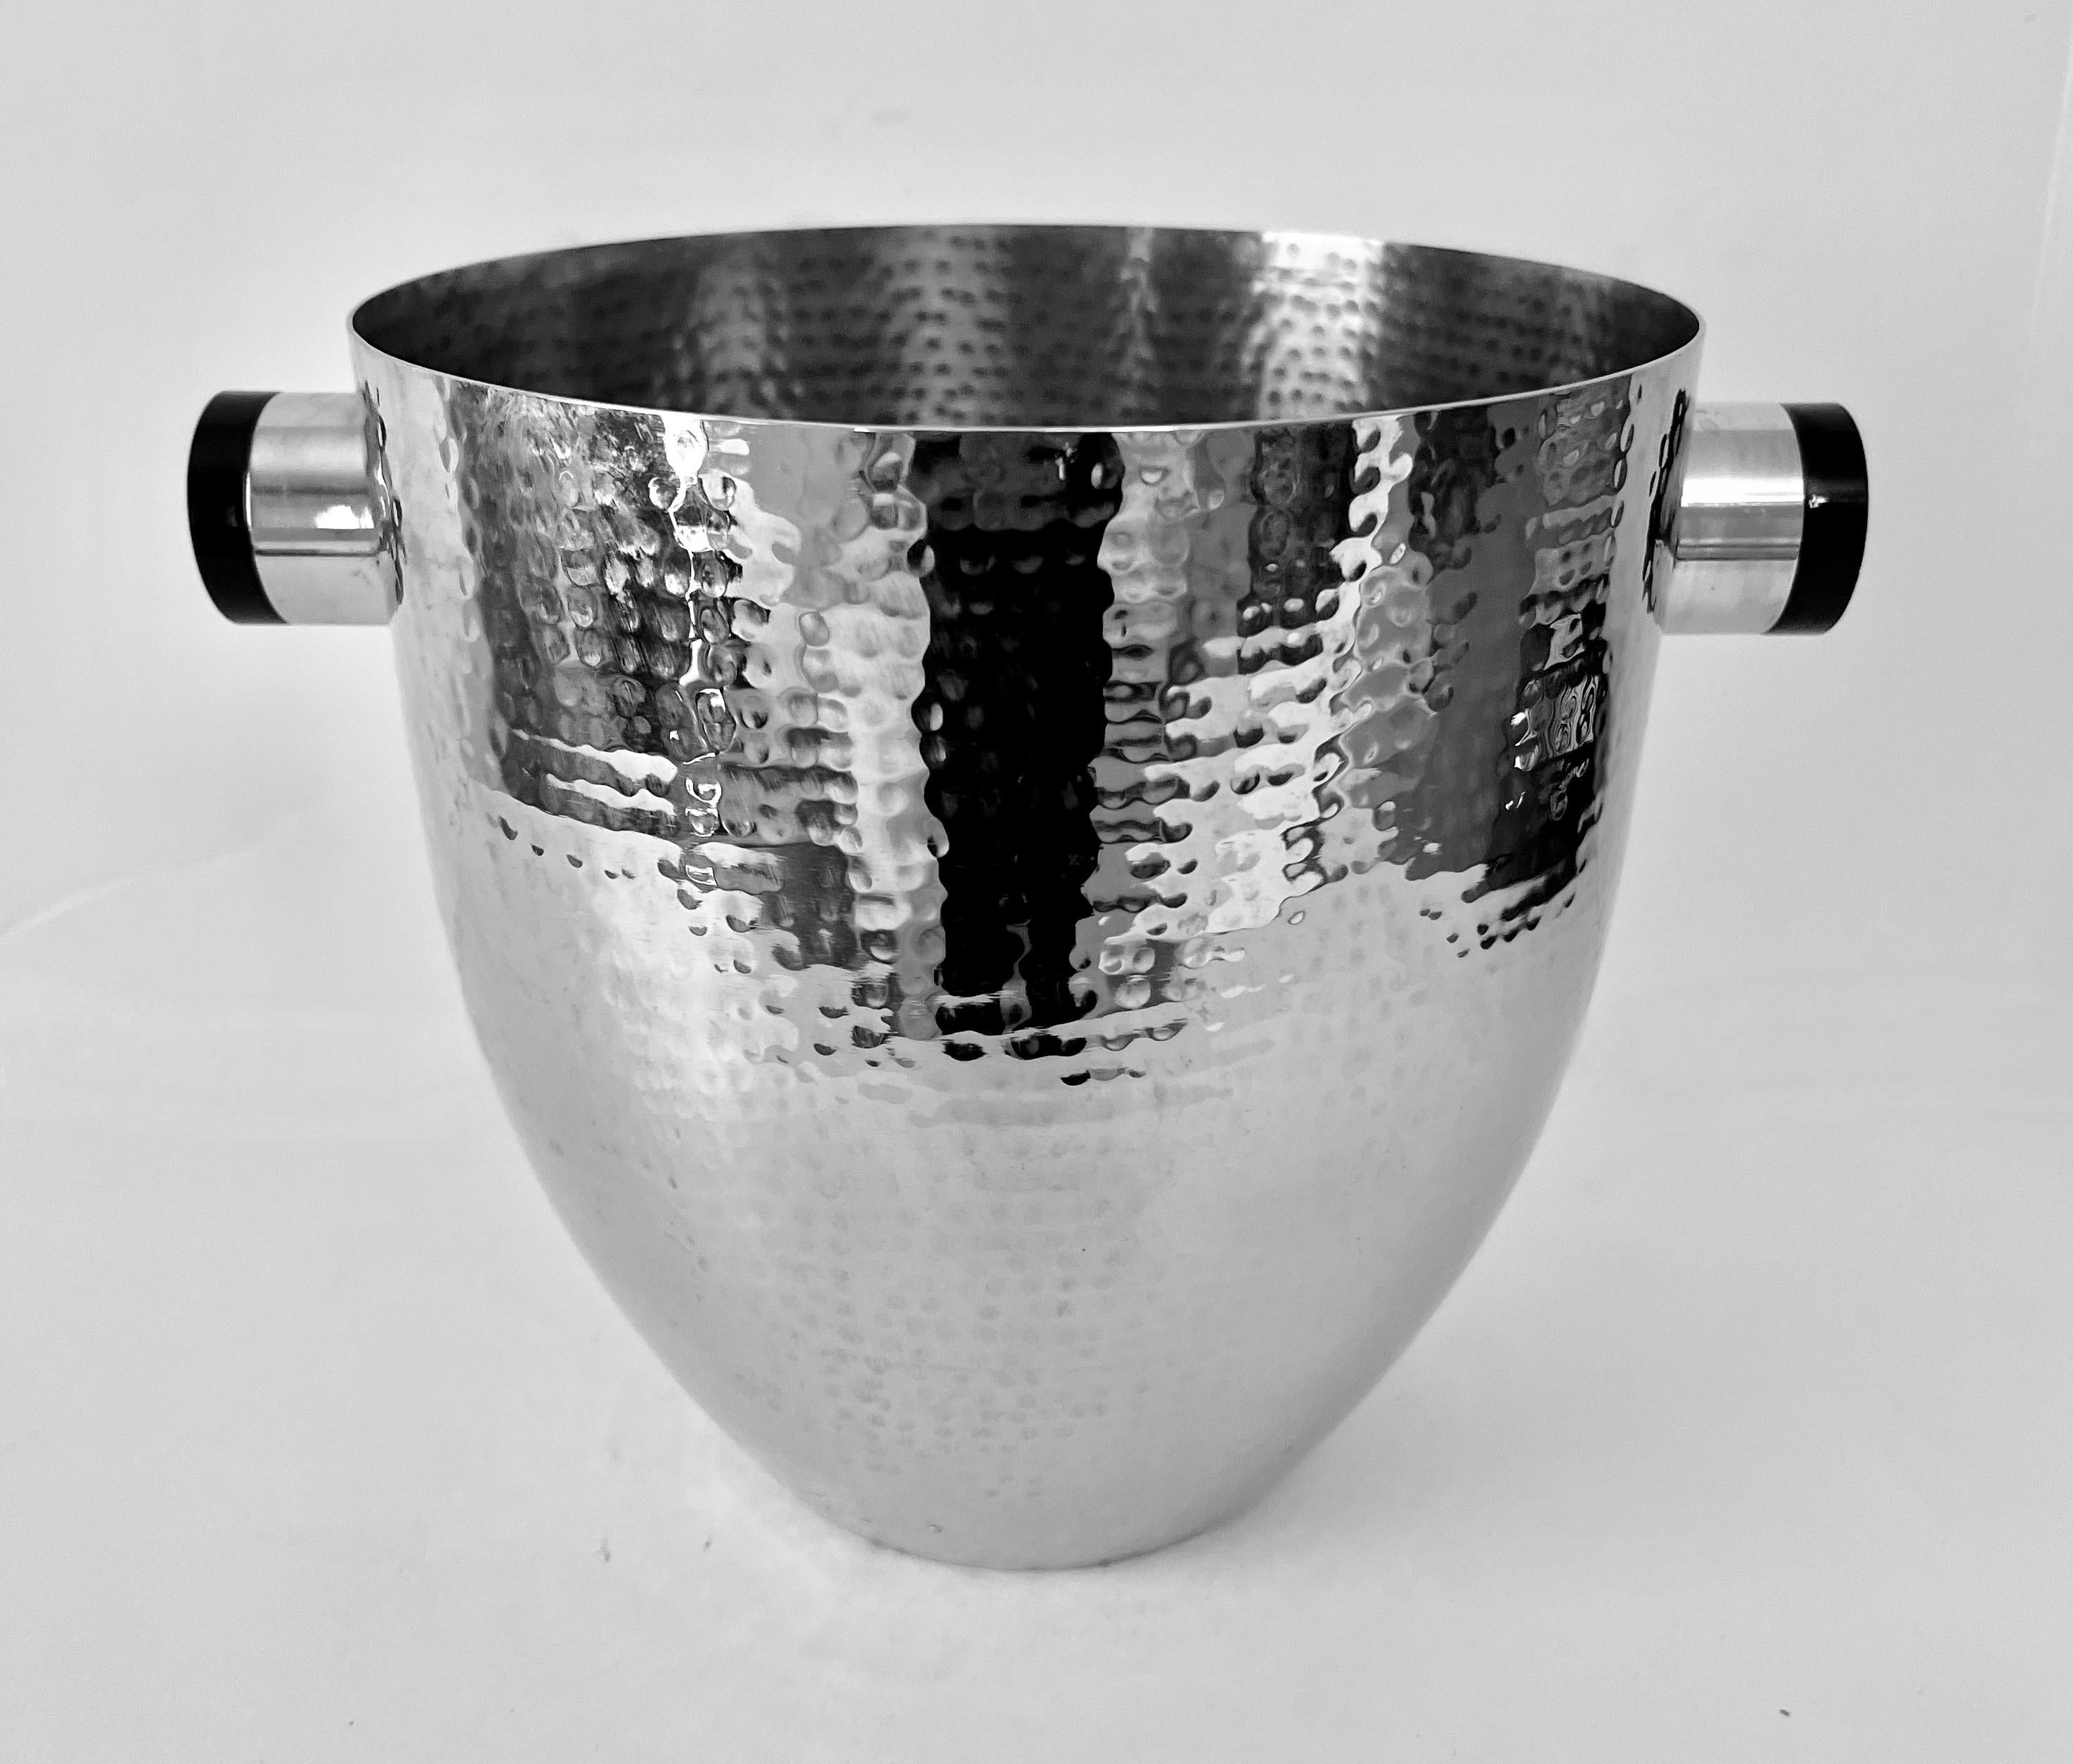 A polished and Hammered Chrome or Silver Champagne /Wine cooler or Ice Bucket.

The piece is in very good condition with unique handle / Cylinders with a black cap of black resin - looks similar to Bakelite.

The size and presence of the bucket make